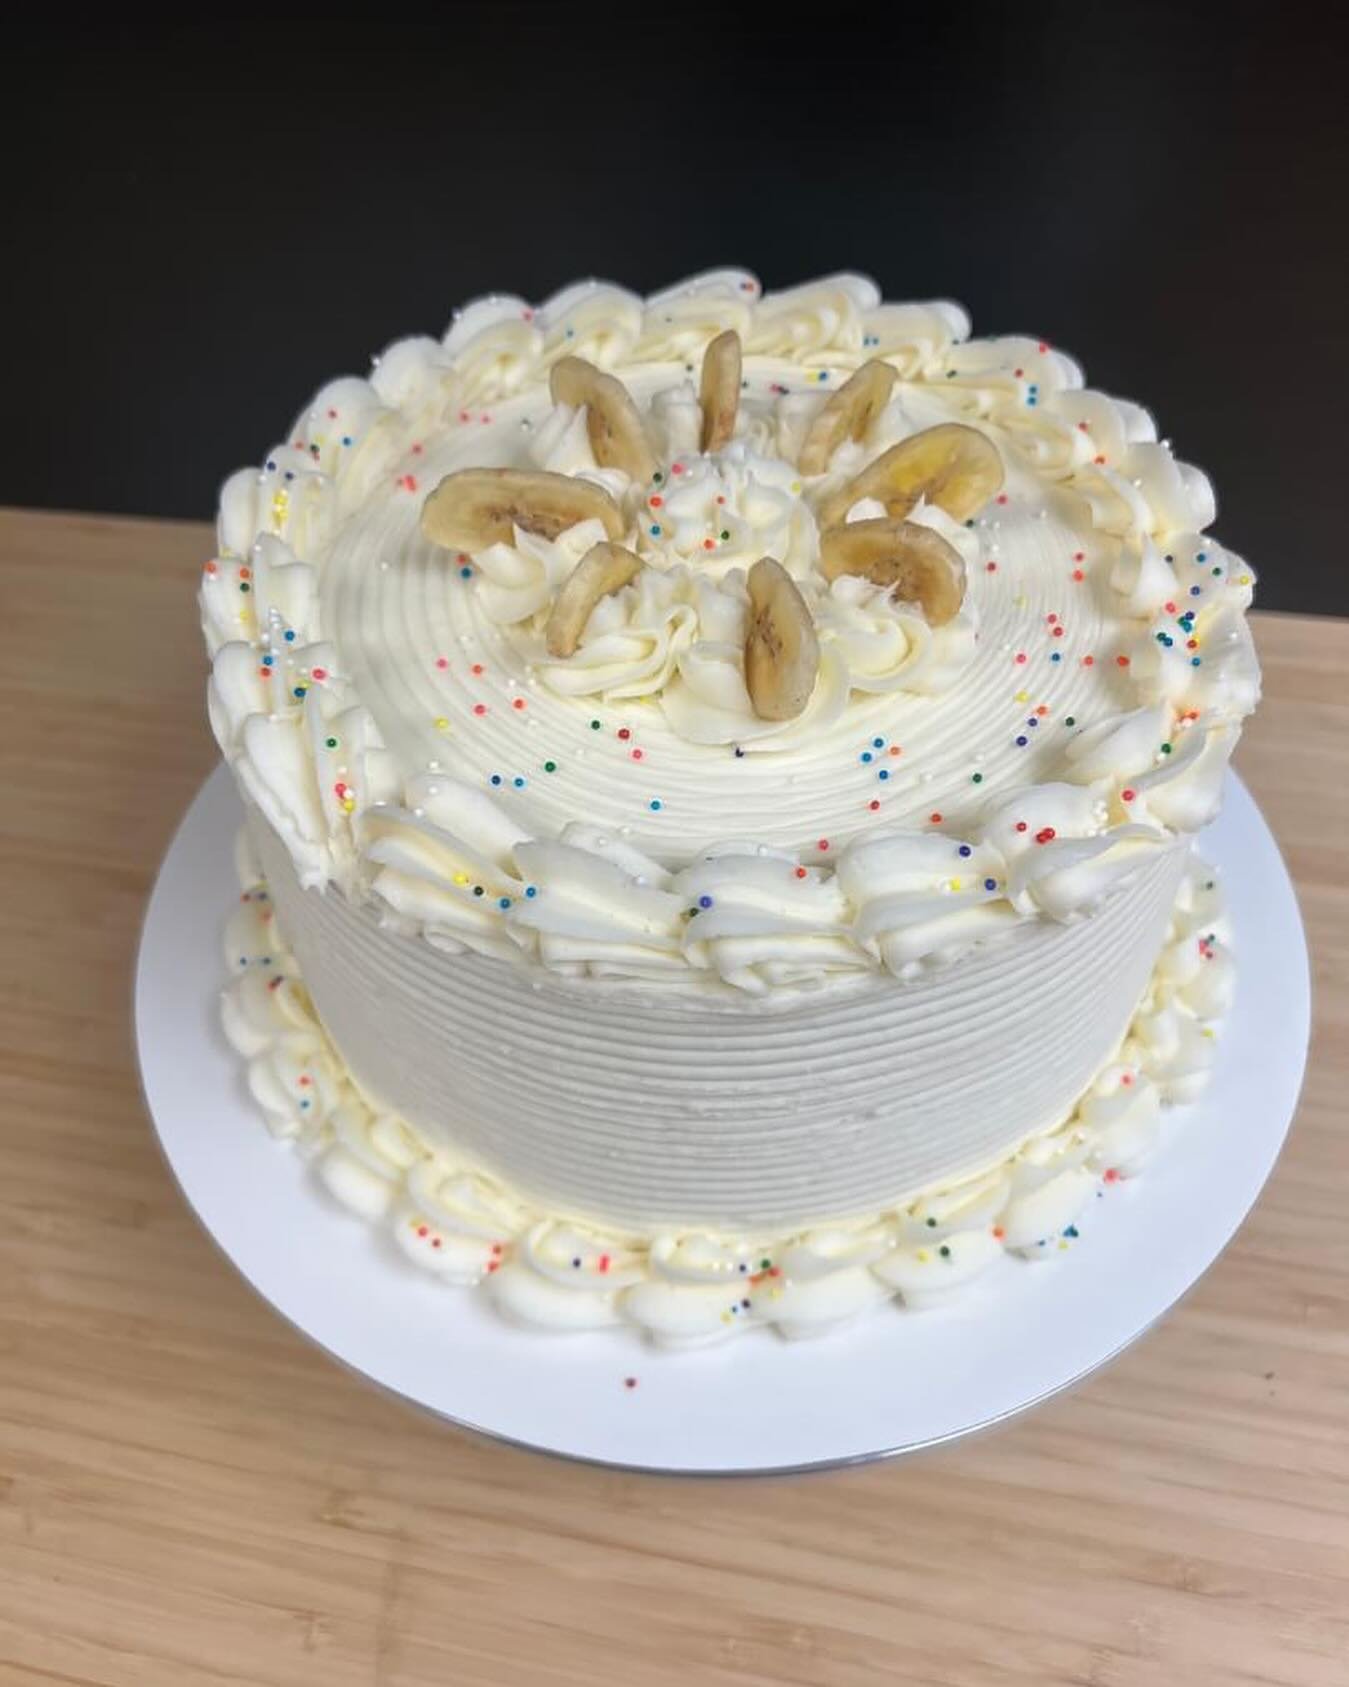 Banana cream cake?? Yes, please! Cream cheese frosting just makes everything better, doesn&rsquo;t it? 

 #johnsonvillecakes #birthdaycakesofwaco #cakesofwaco #wacocakes #cakesofmcgregor #cakesofmcgregortexas #cakesofwacotexas #birthdaycakesfordad